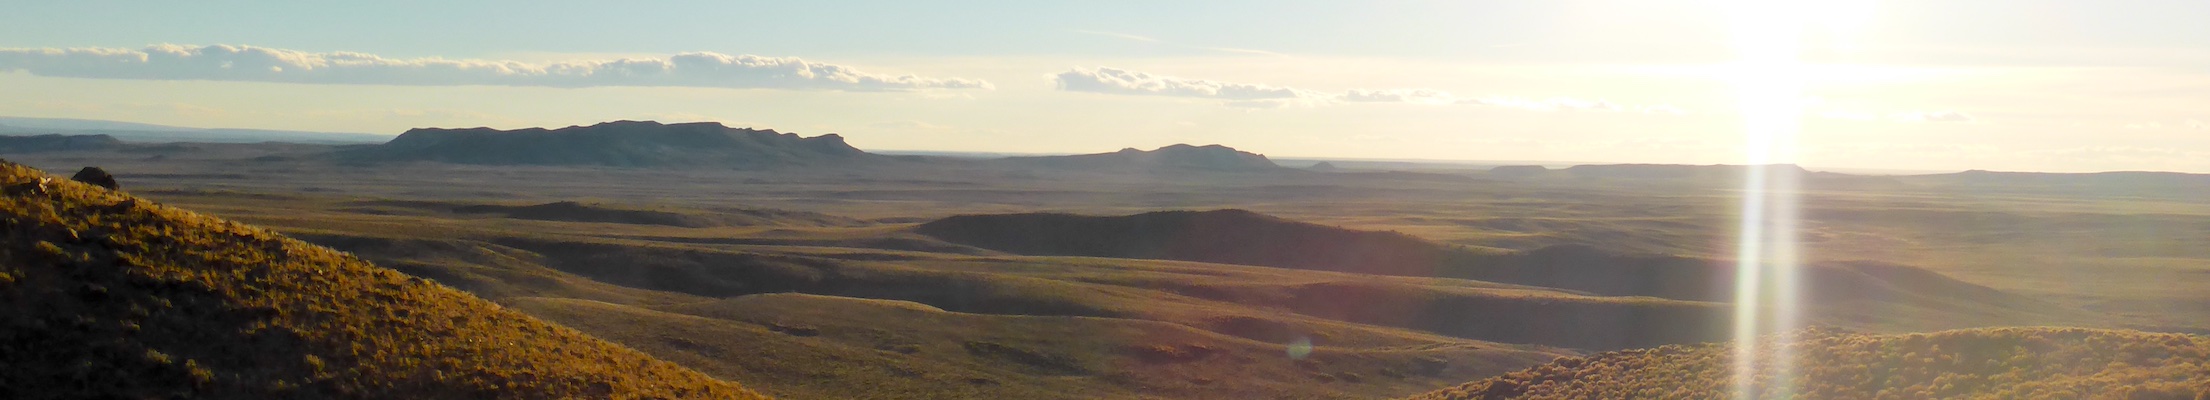 Photo of rolling sagebrush and distant buttes in sunlight.